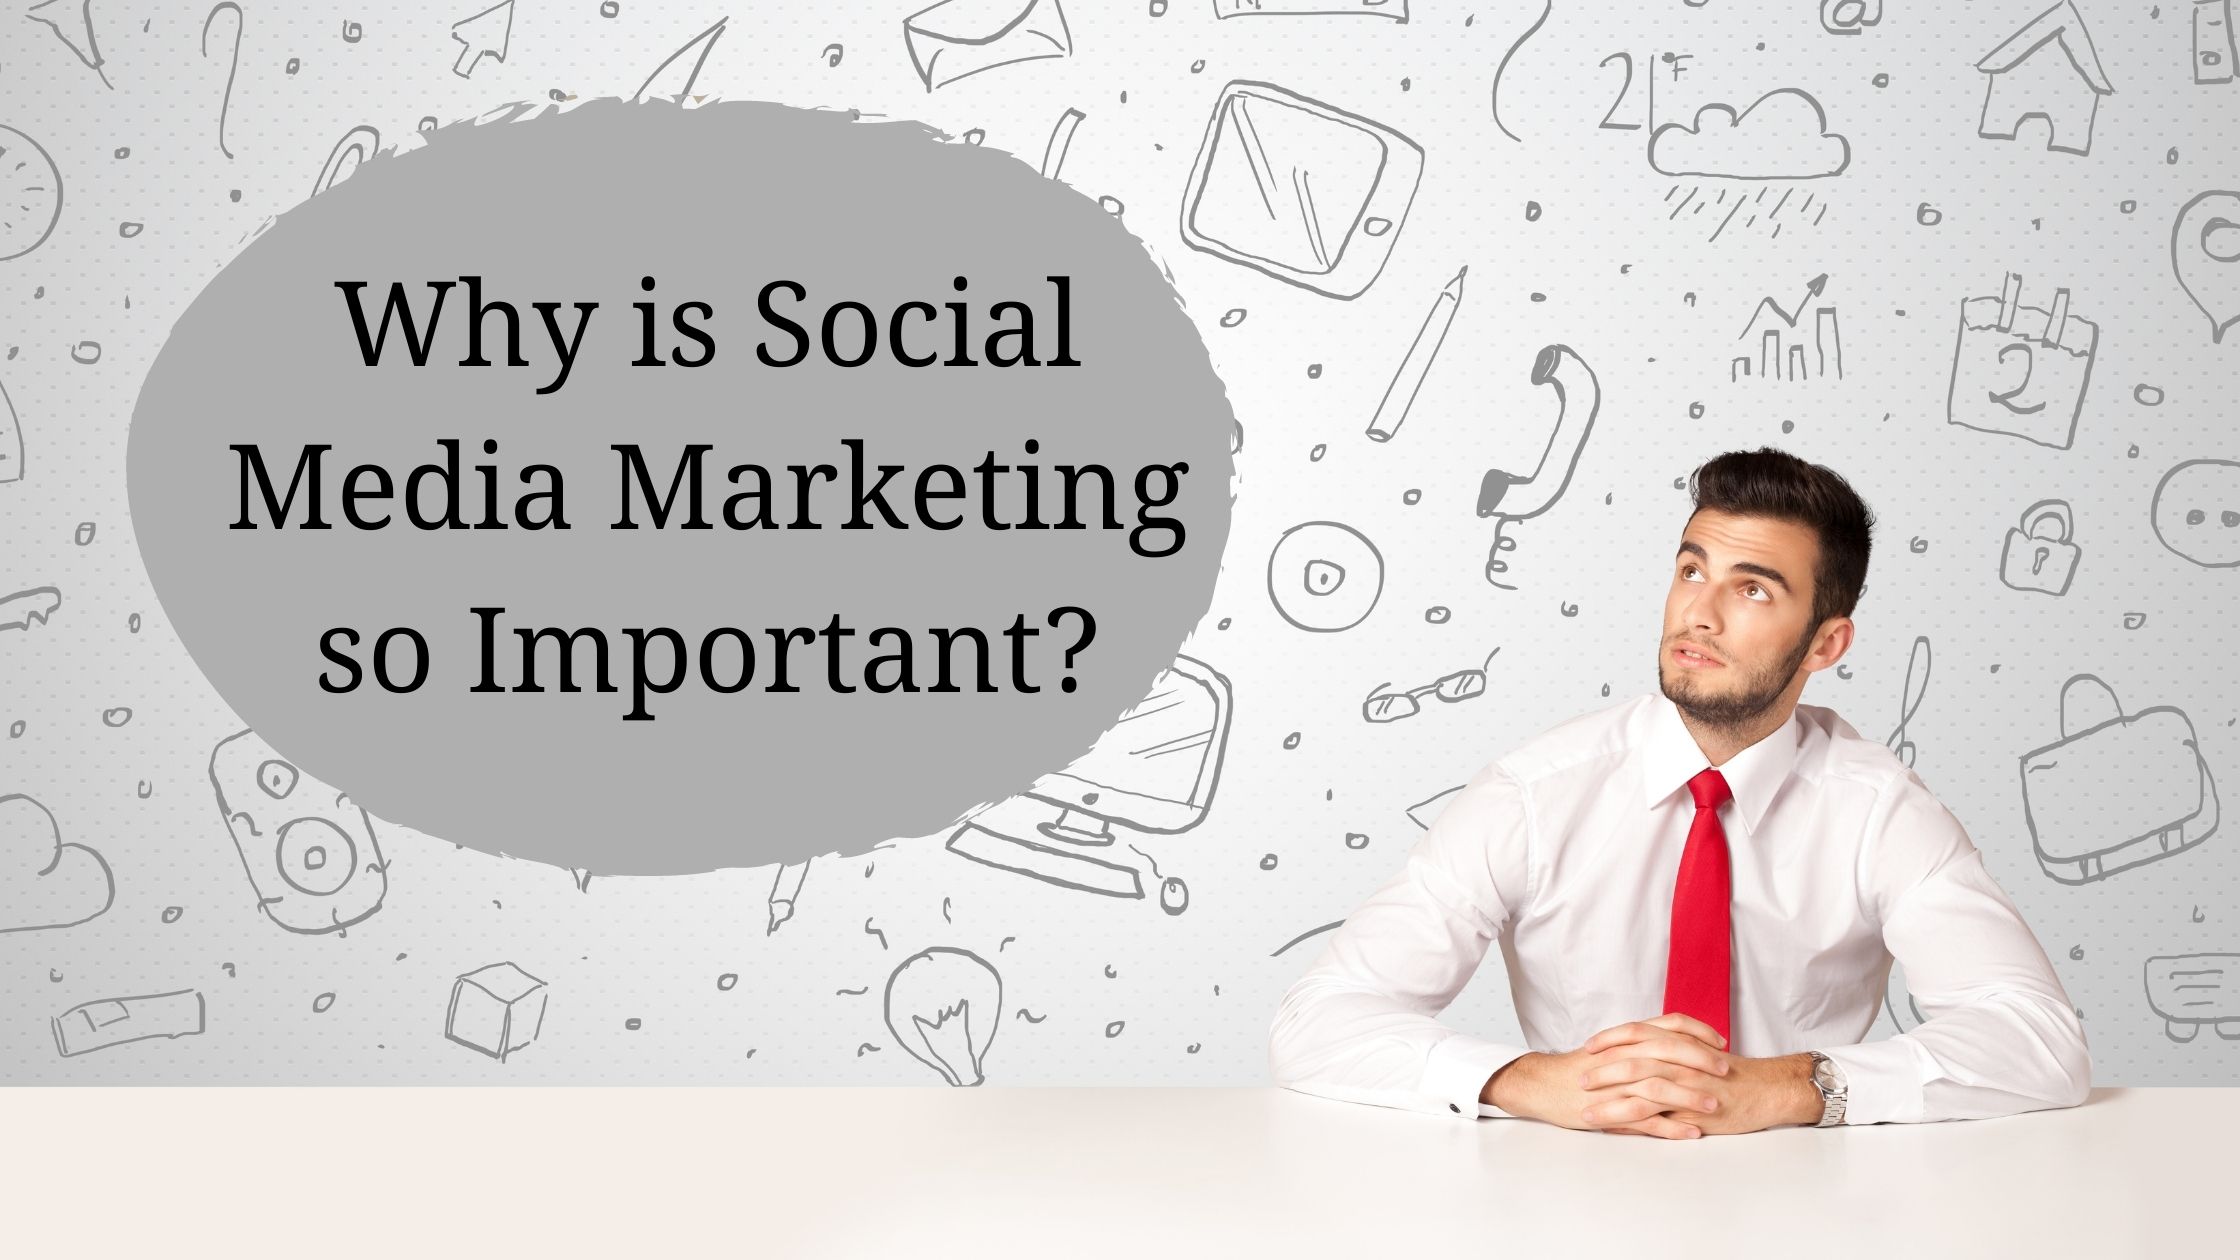 Why is Social Media Marketing so Important?